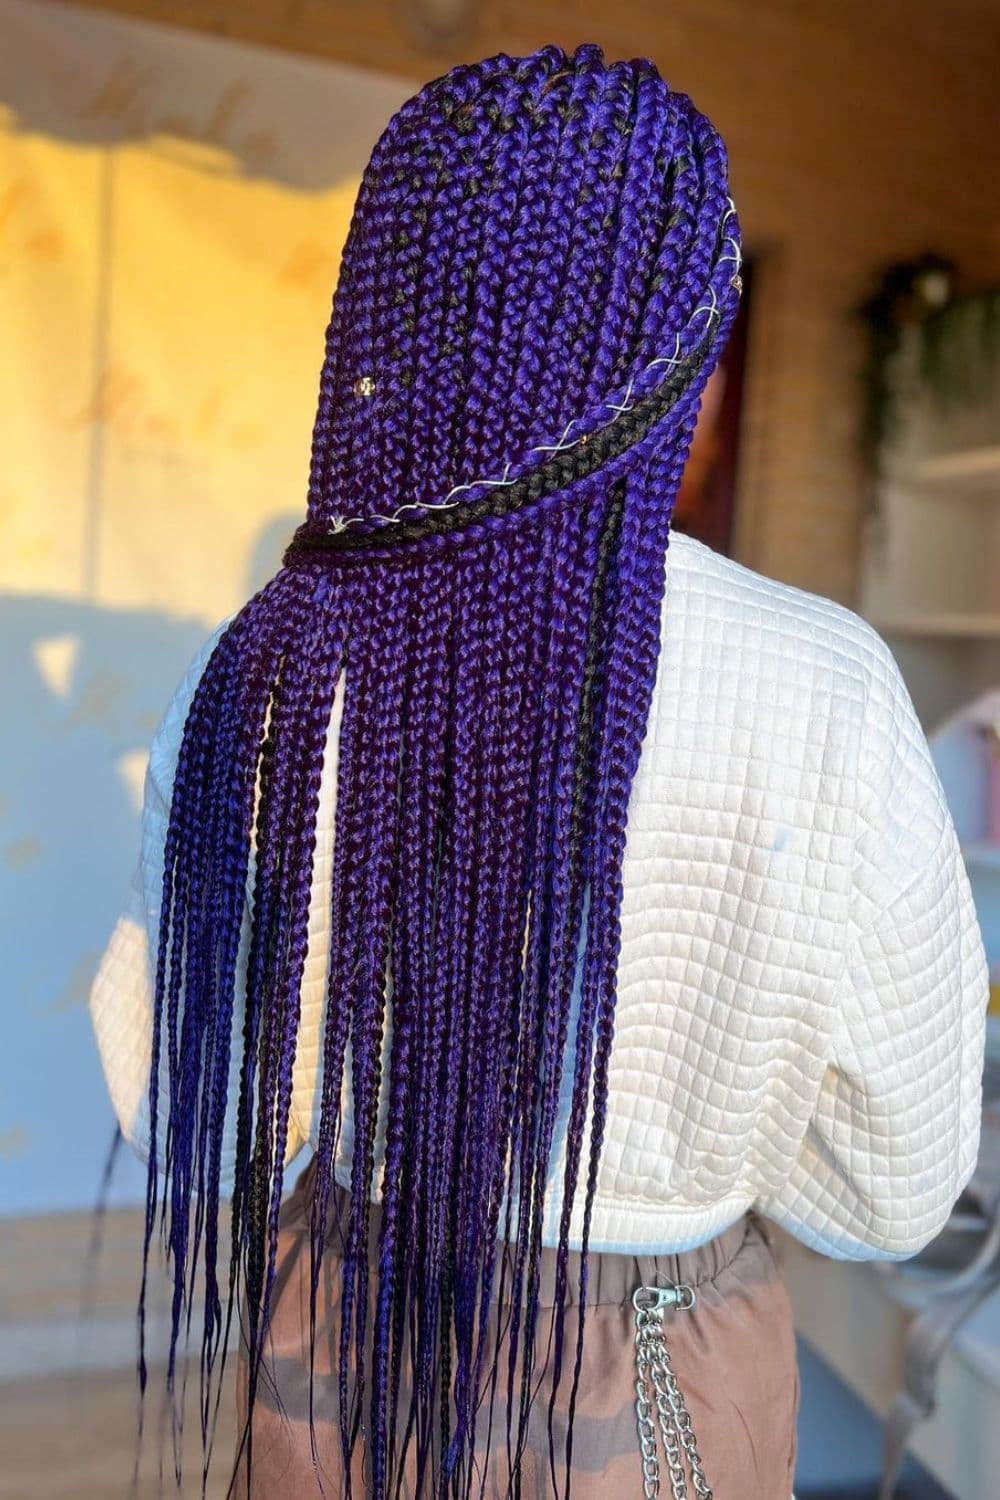 A person with purple box braids with thread and cuffs.